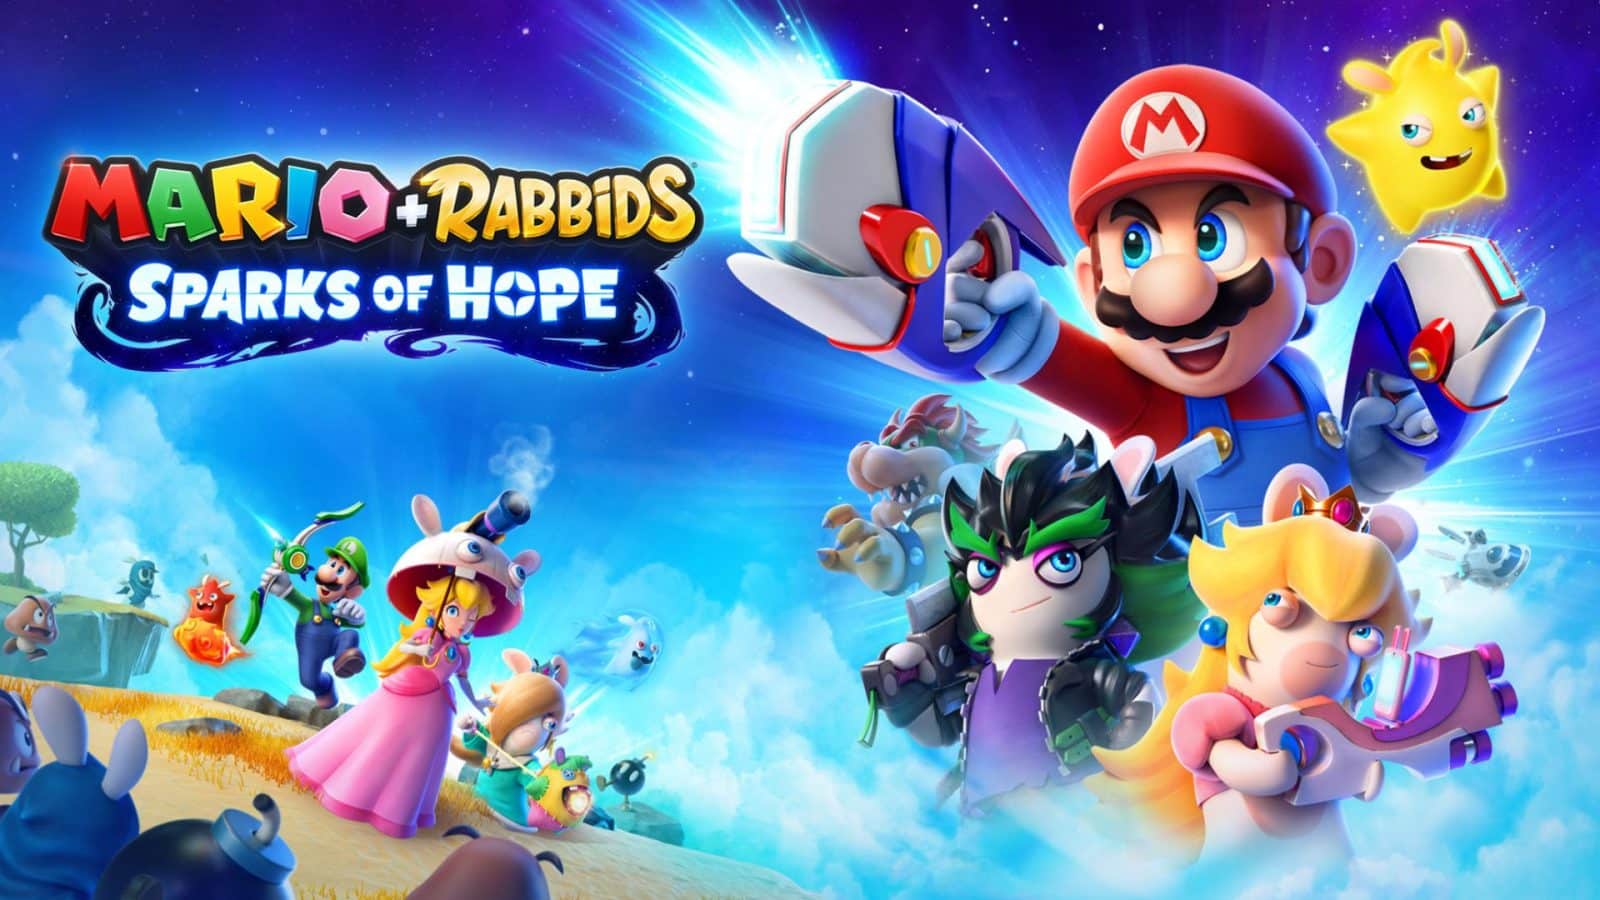 Mario + Rabbids Sparks of Hope Introduction and Team Trailers Revealed